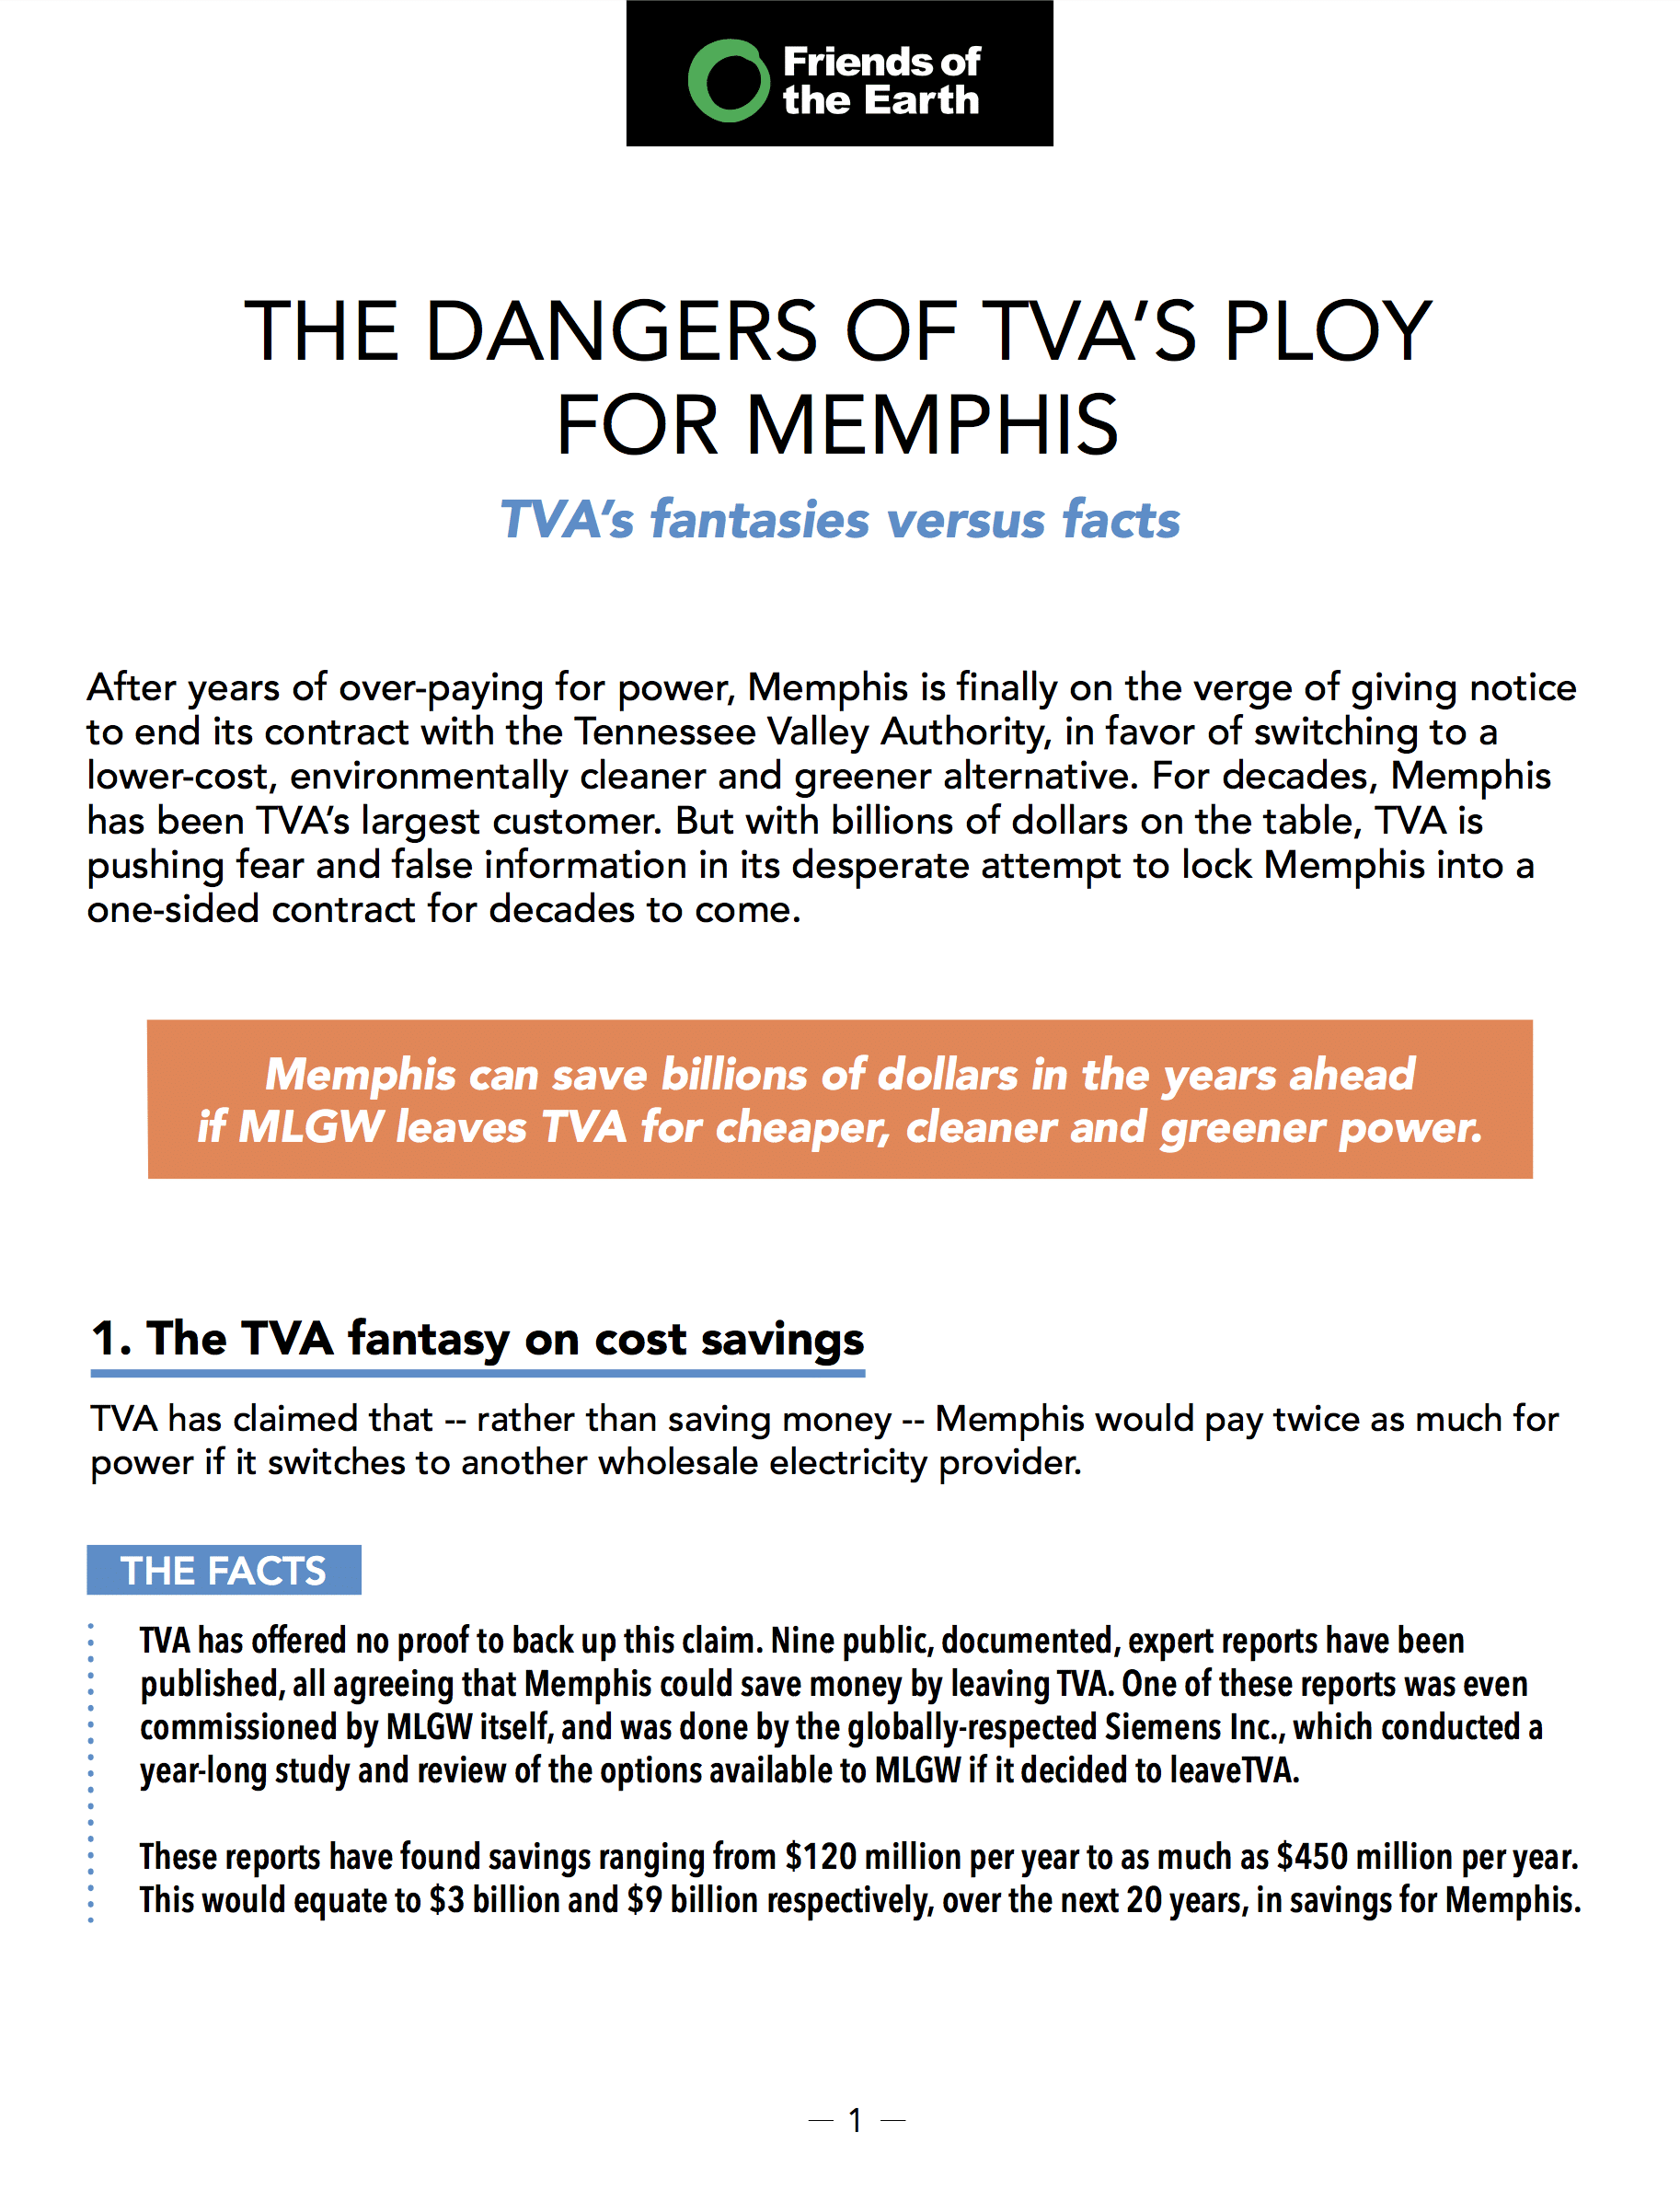 The Dangers of TVA’s Policy for Memphis